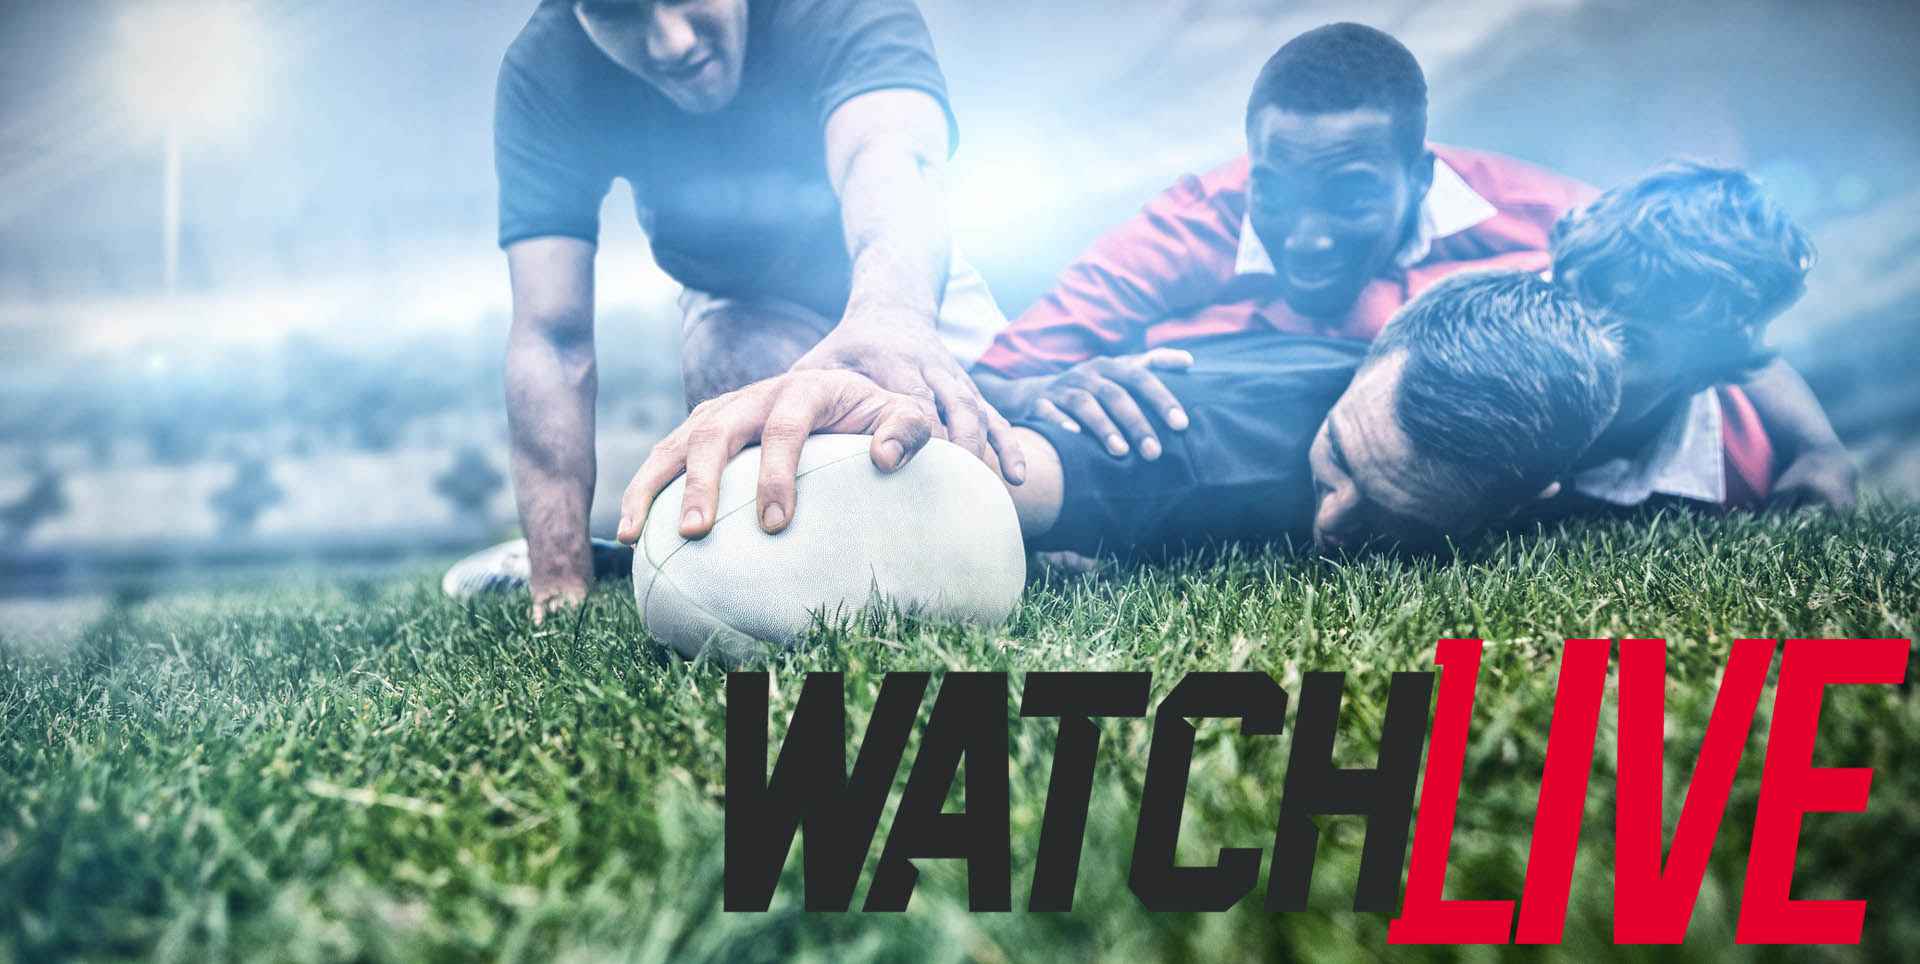 France Rugby World Cup Team 2019 Live Stream